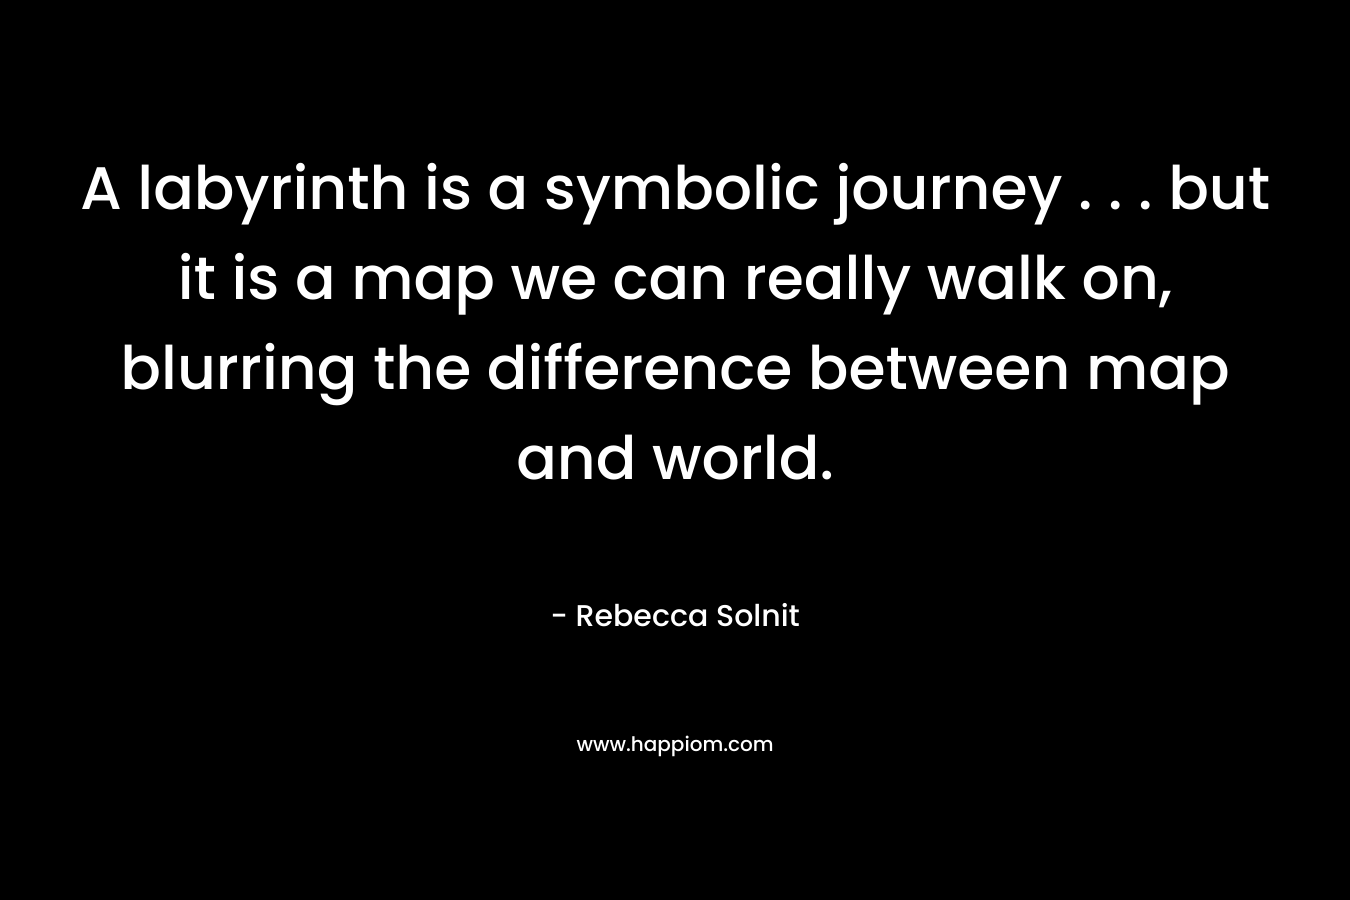 A labyrinth is a symbolic journey . . . but it is a map we can really walk on, blurring the difference between map and world.